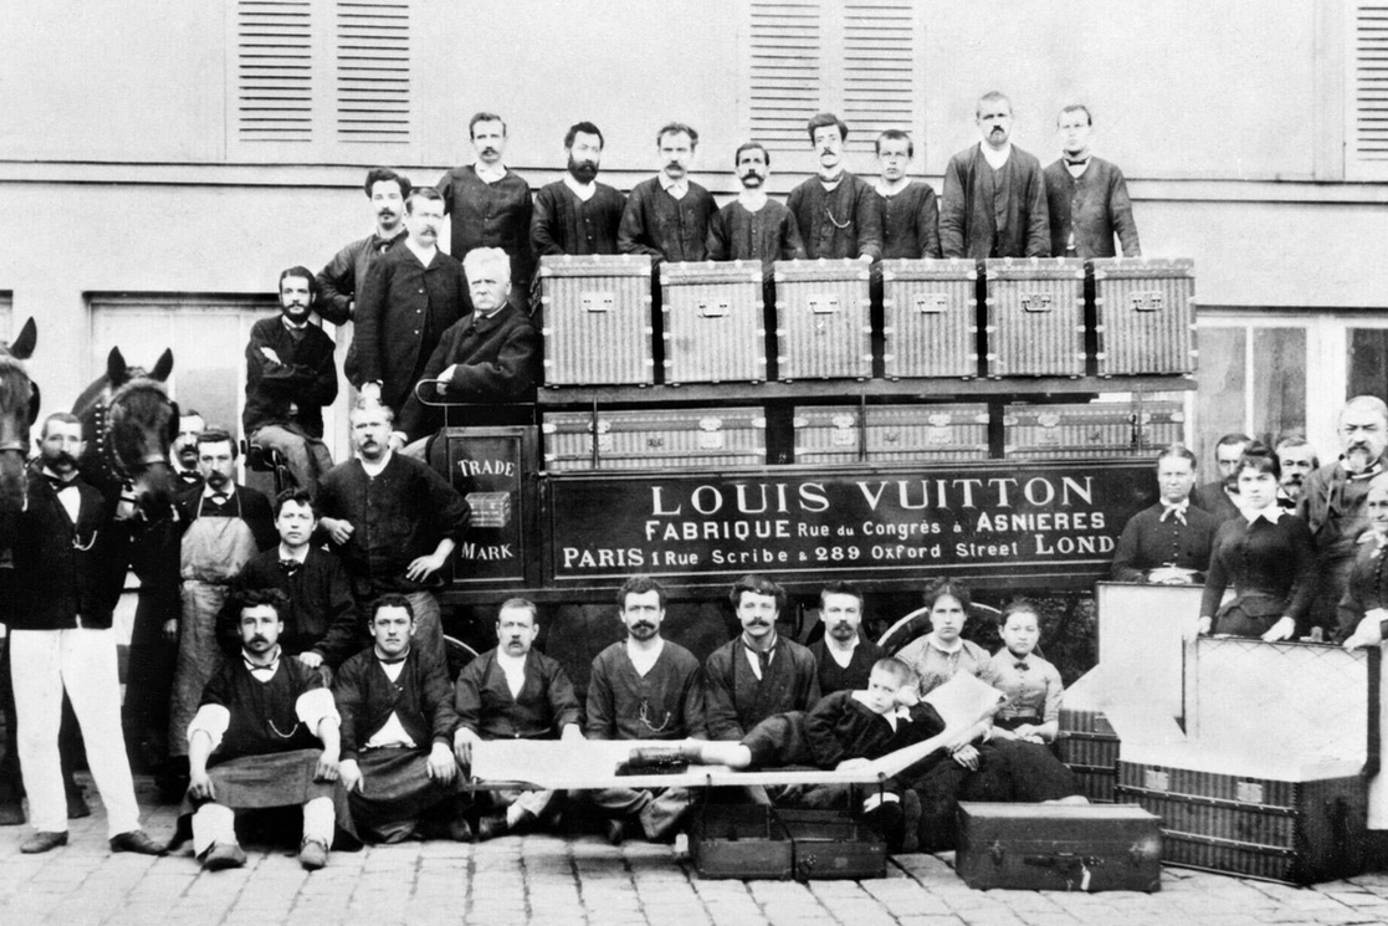 Louis Vuitton marks 200th anniversary with art video game